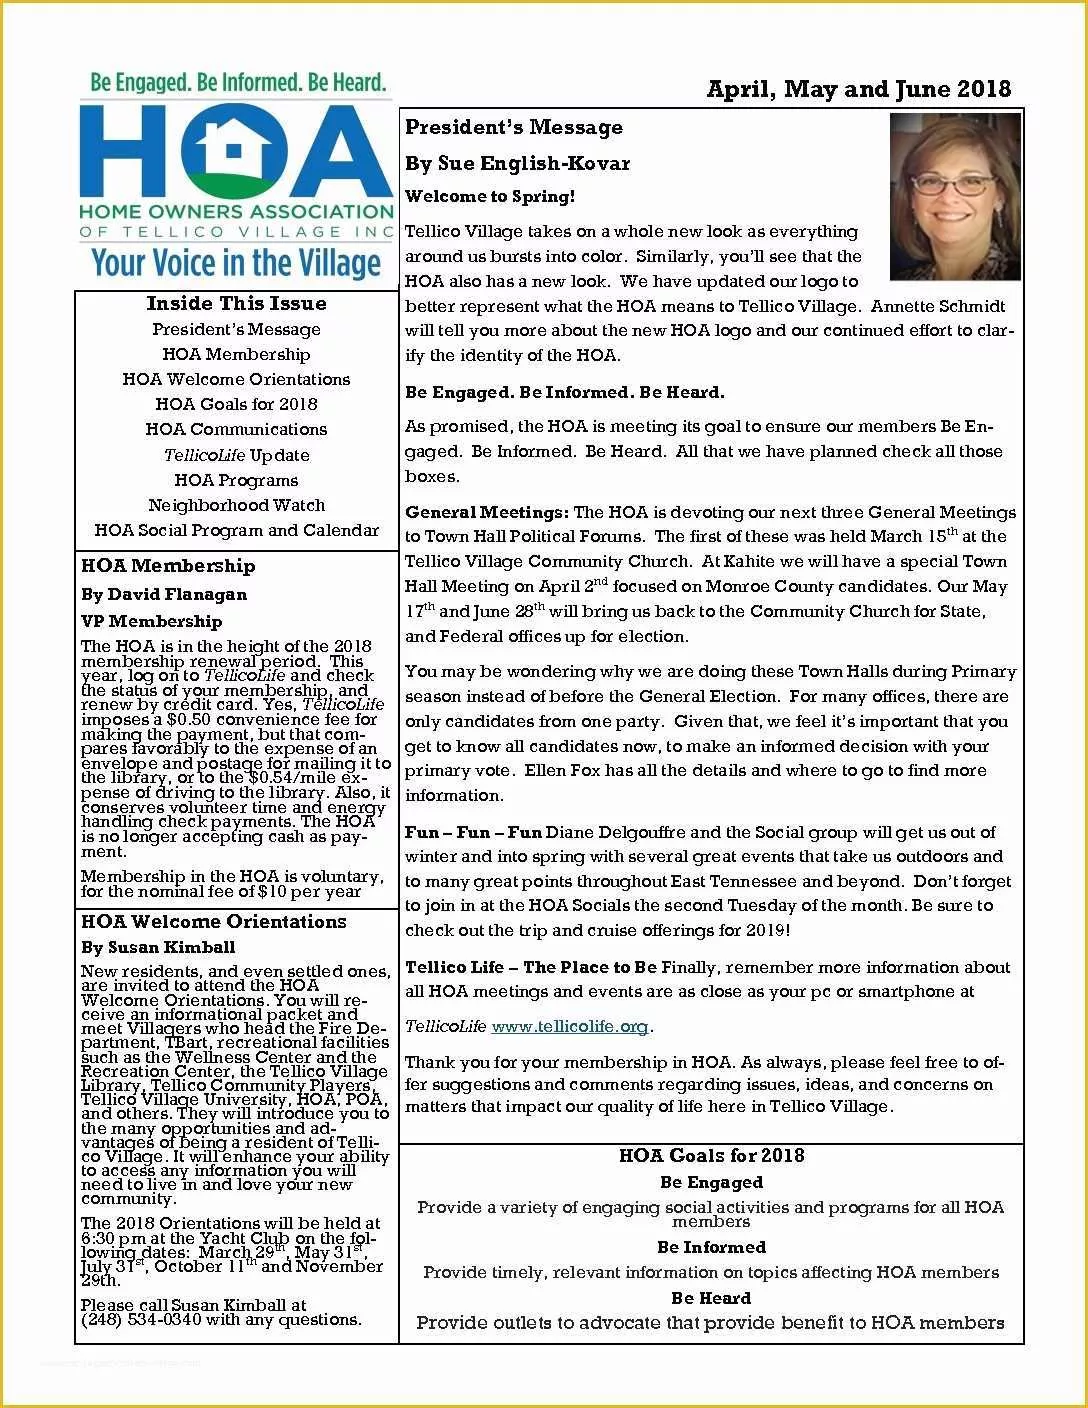 Free Hoa Newsletter Templates Of Tellico Village Homeowners association – Be Informed – Be